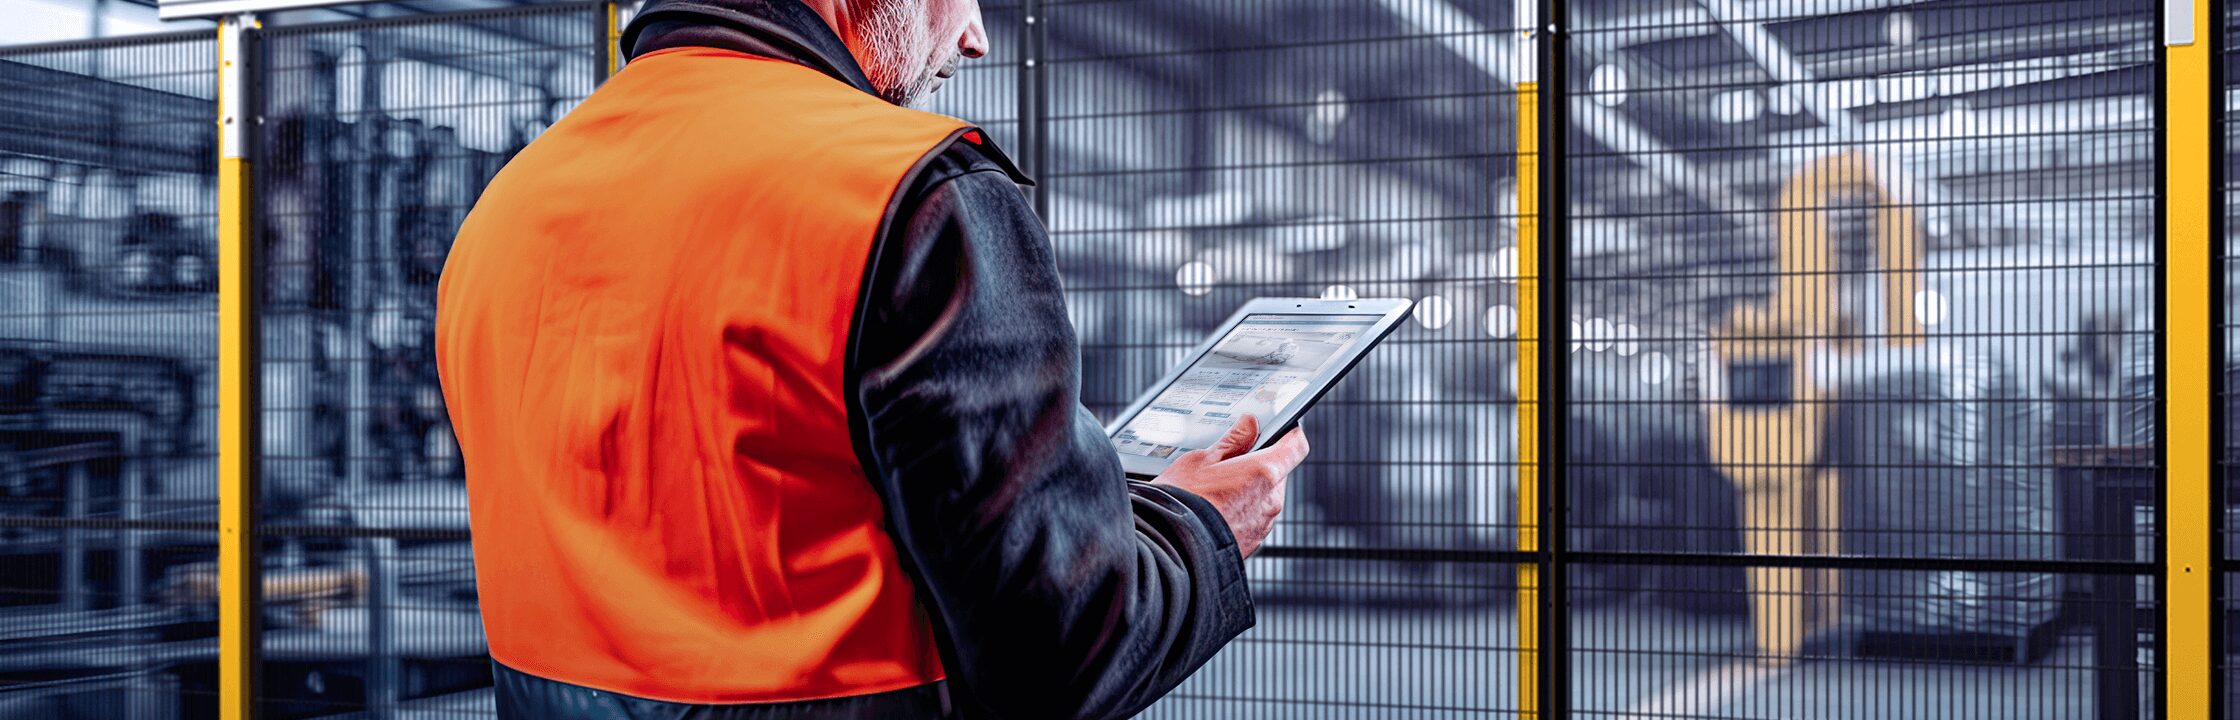 Operator consulting the OSHA website in front of Satech Safety Fencing within an industrial environment